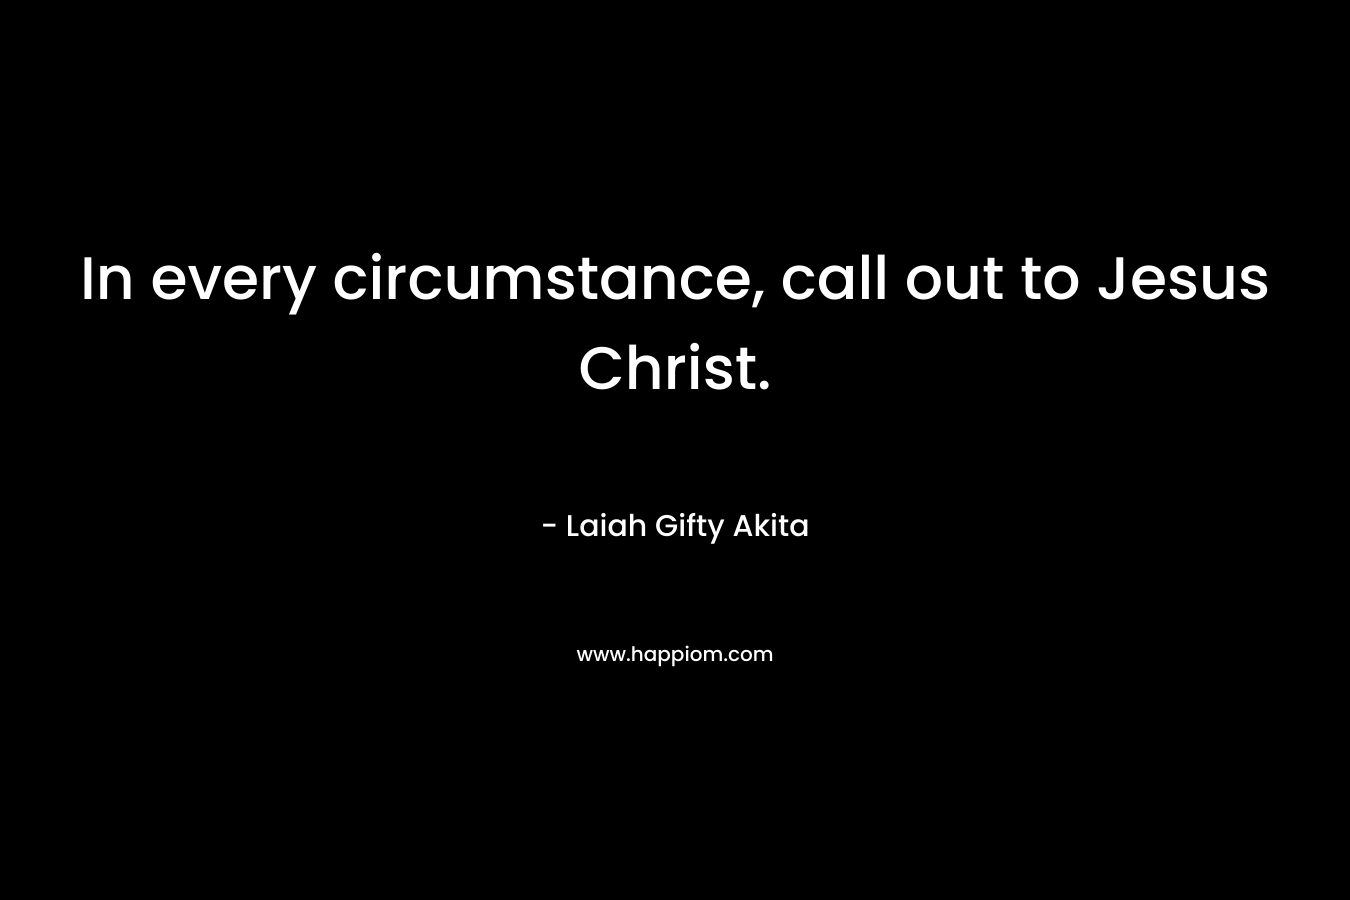 In every circumstance, call out to Jesus Christ.